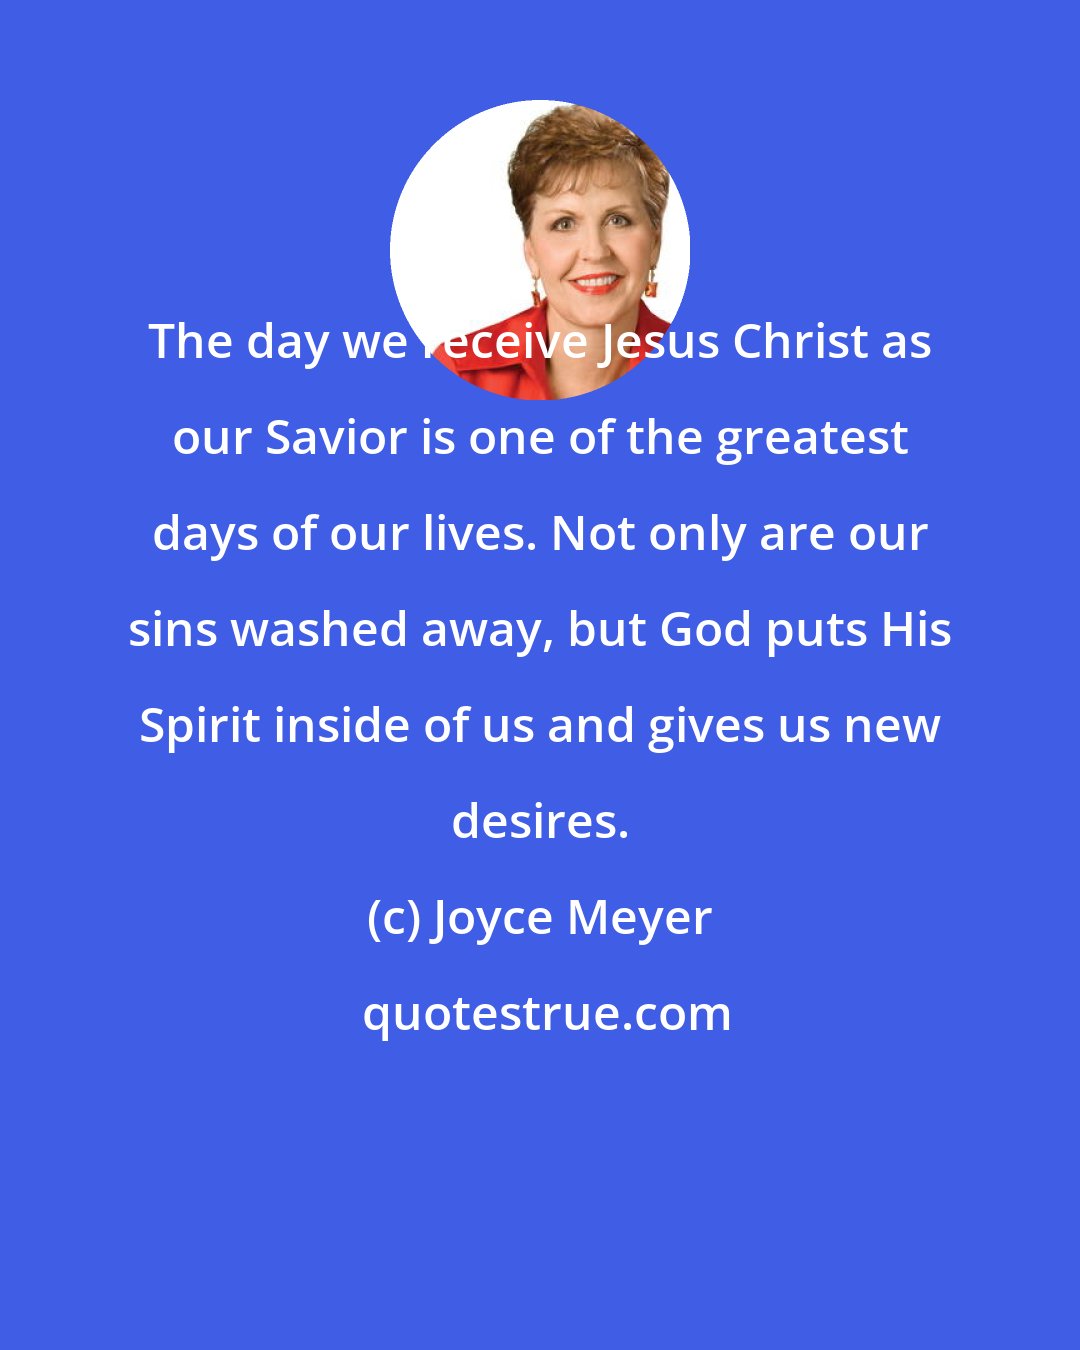 Joyce Meyer: The day we receive Jesus Christ as our Savior is one of the greatest days of our lives. Not only are our sins washed away, but God puts His Spirit inside of us and gives us new desires.